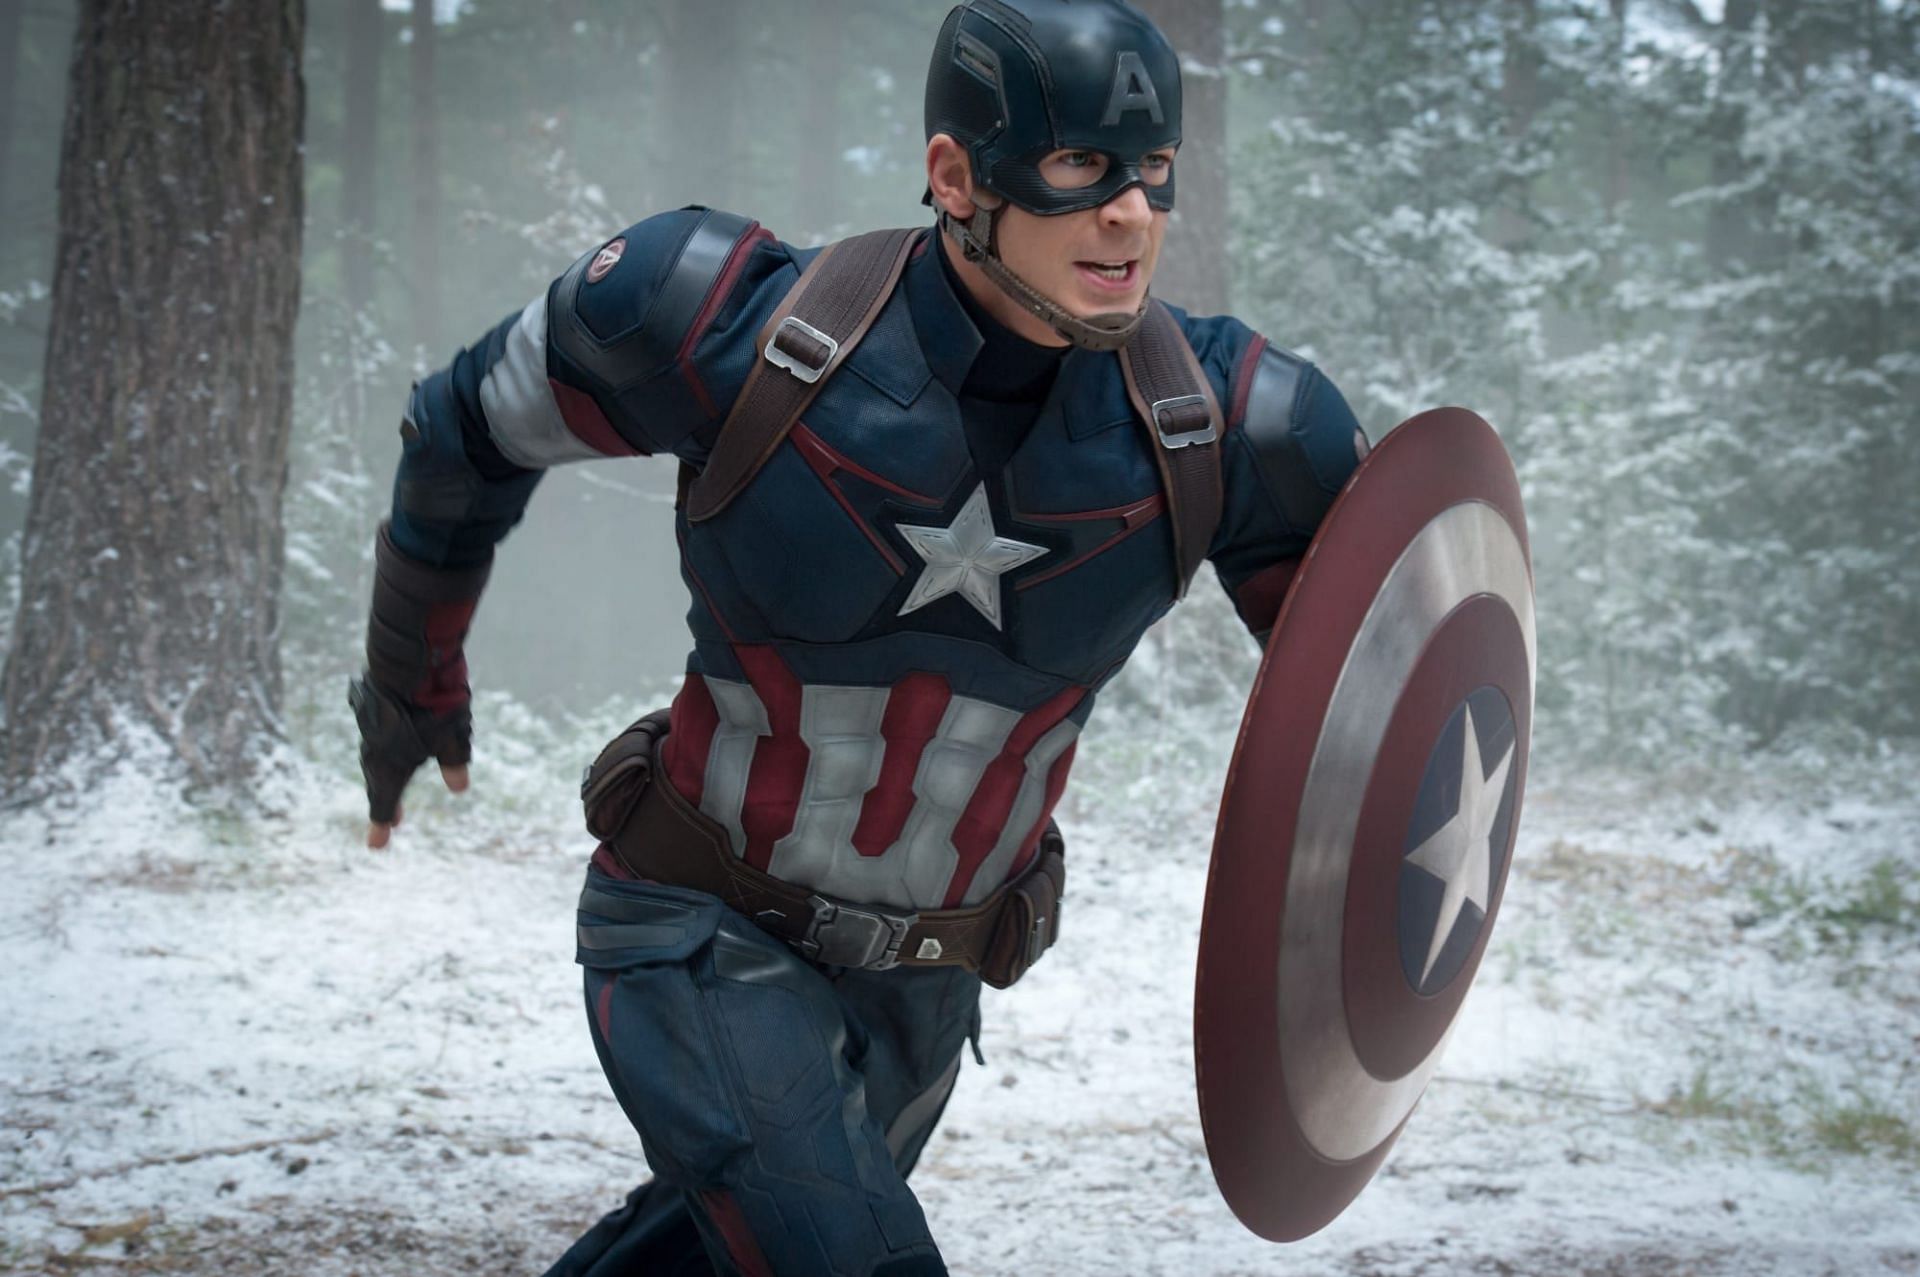 From patriot to cliche: The overrated hero of American idealism (Image via Marvel Studios)